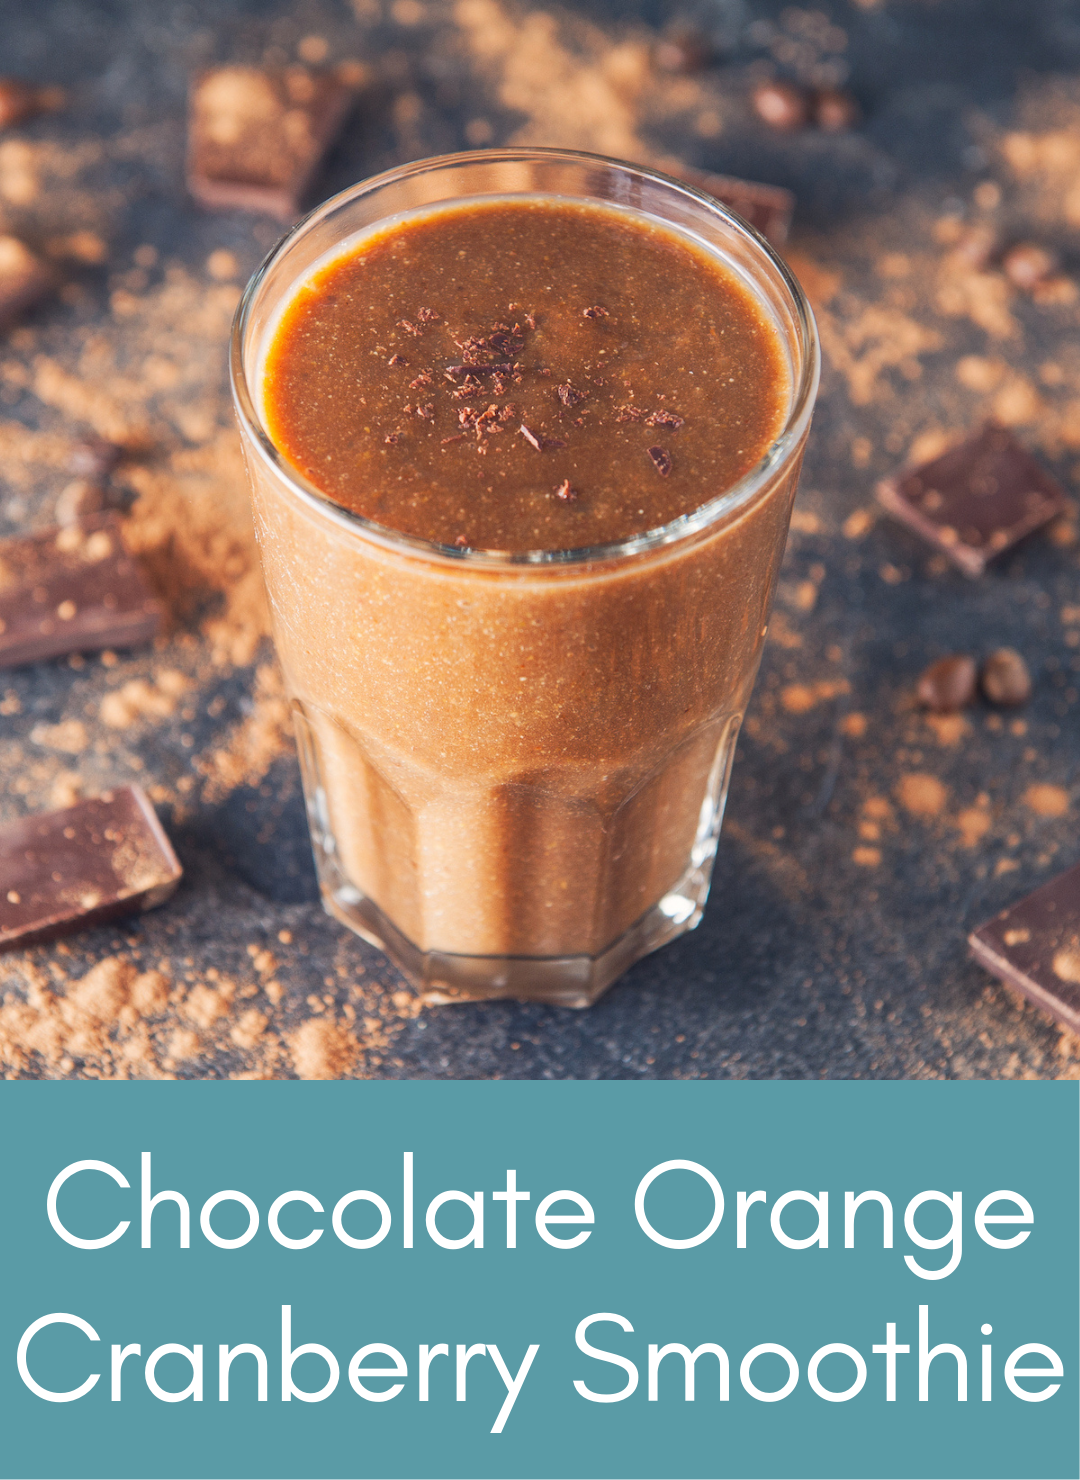 Chocolate orange cranberry vegan smoothie Picture with link to recipe